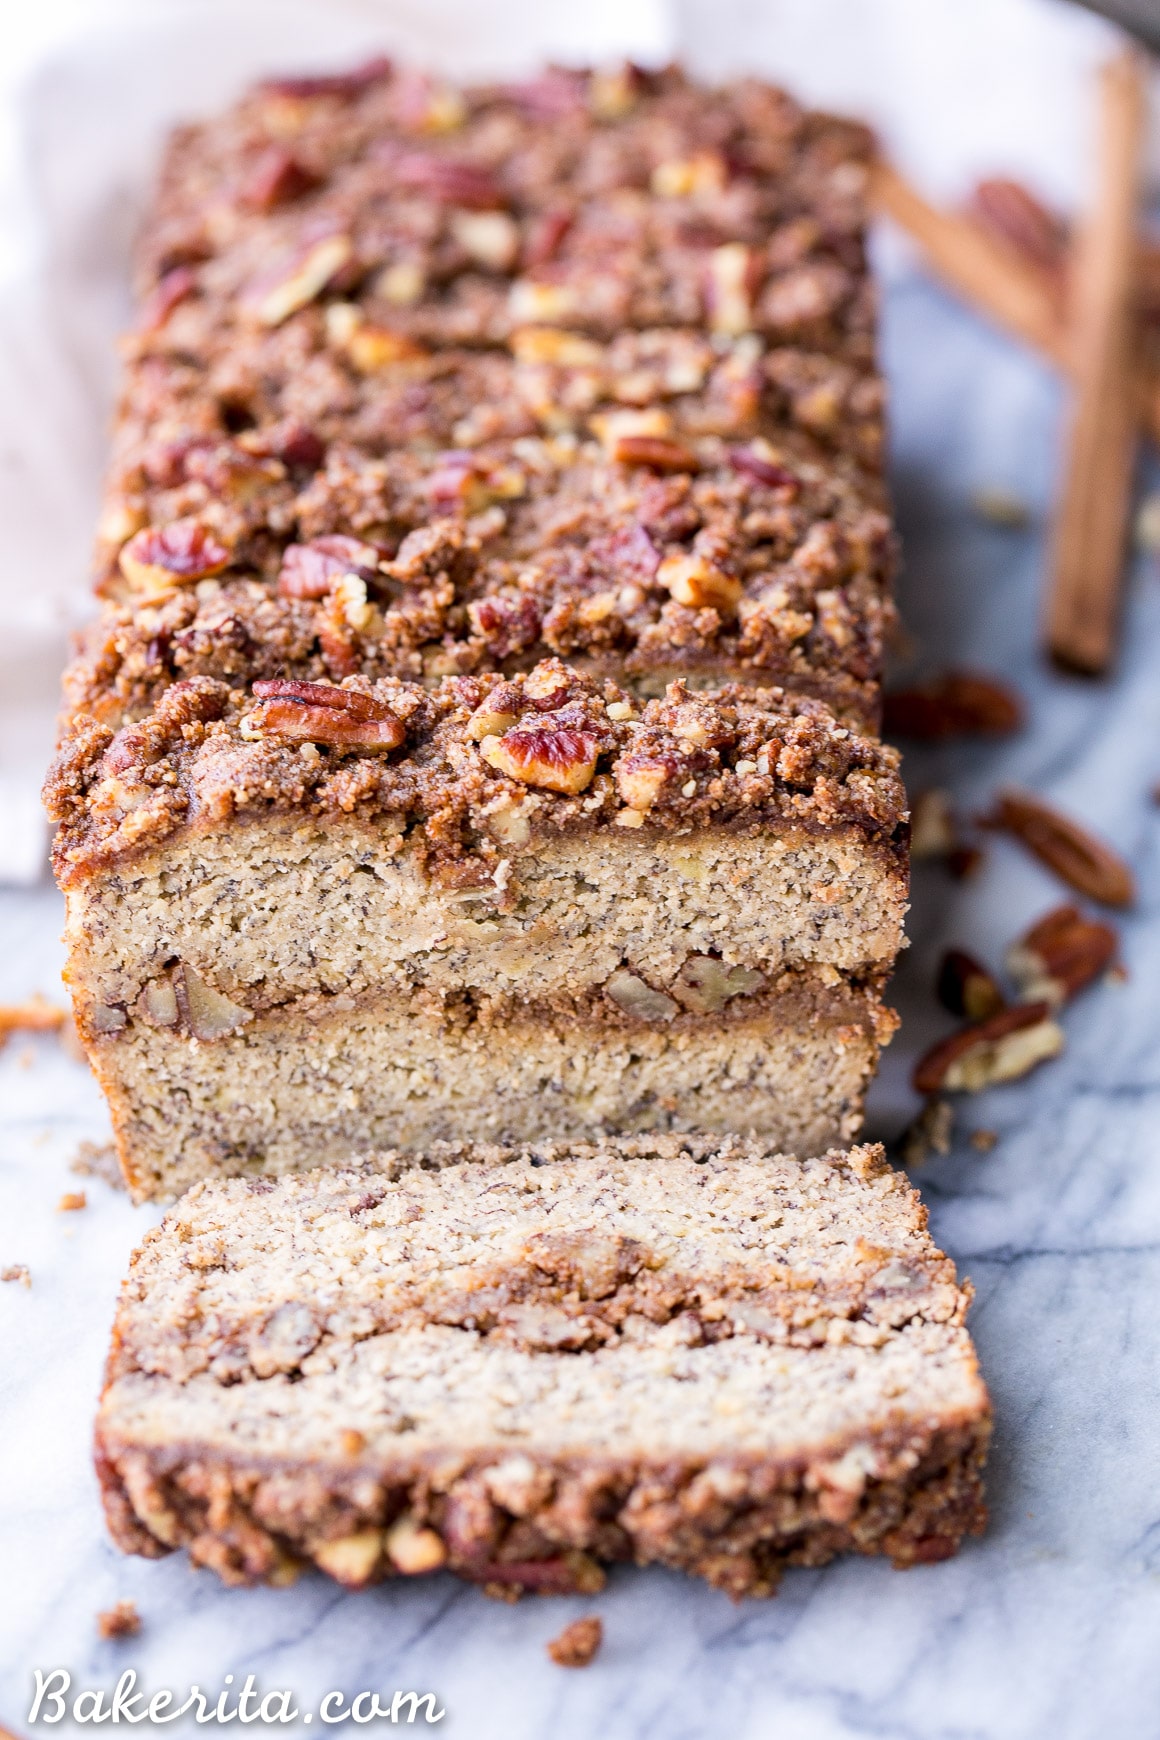 This Paleo Cinnamon Streusel Banana Bread has a layer of pecan crumble in the center and on top, creating a ripple of cinnamon flavor throughout the whole loaf of banana bread. This moist gluten-free + refined sugar free bread is sweetened with bananas and made with coconut flour.